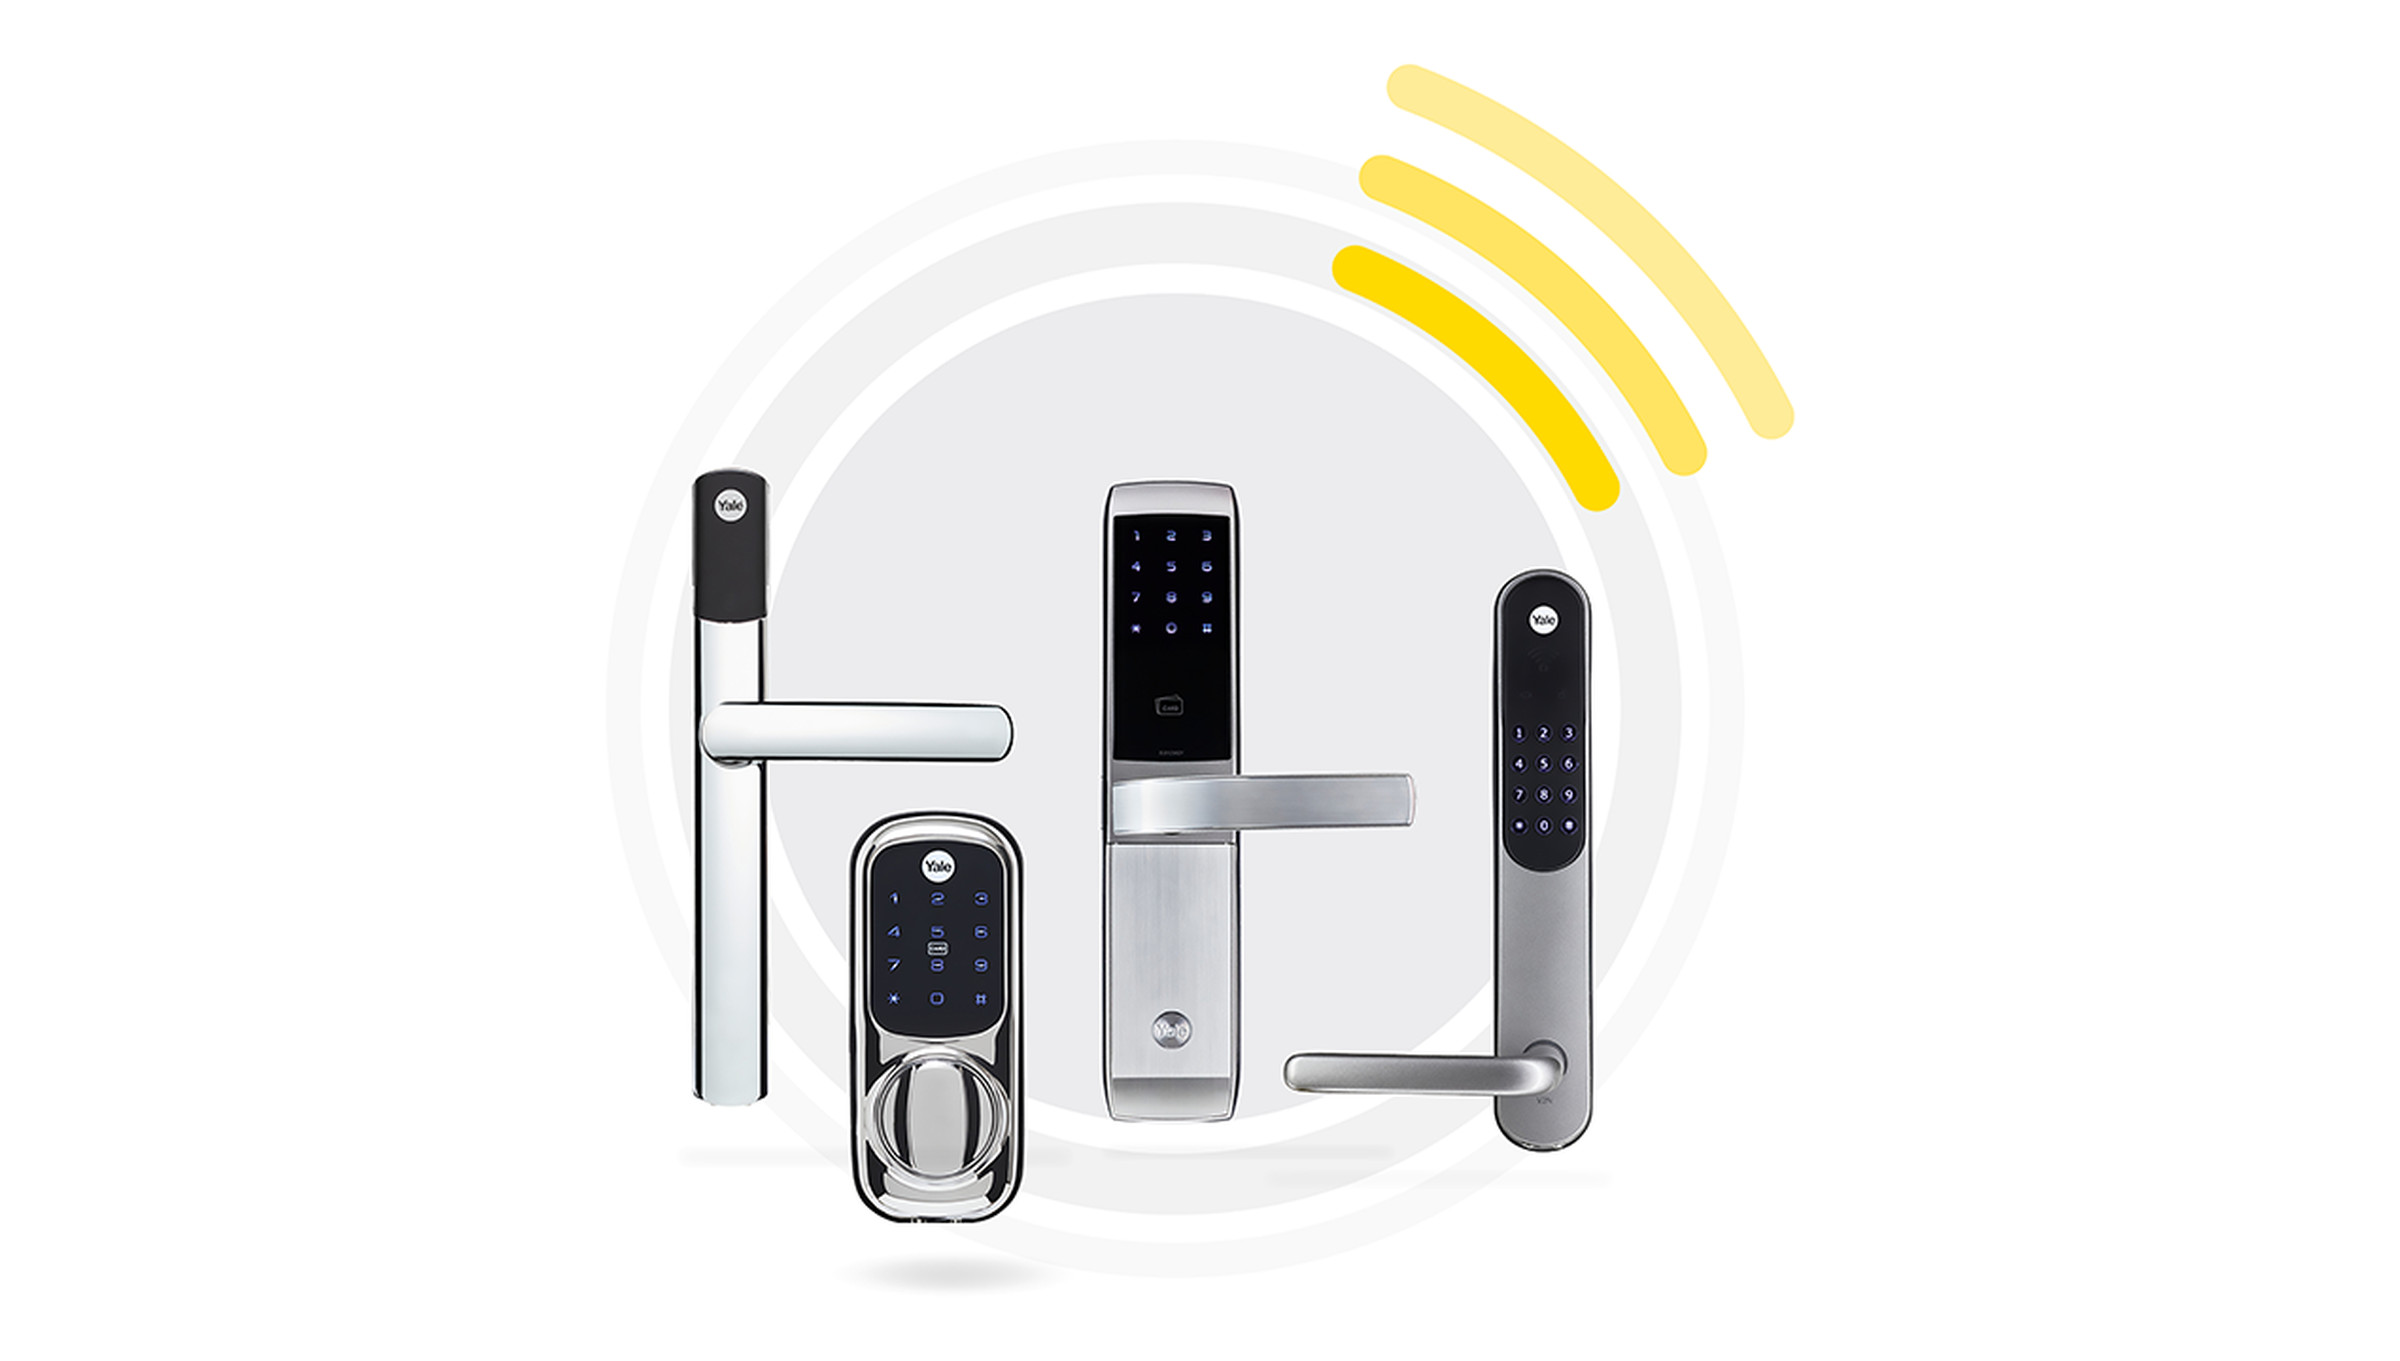 The module will be compatible with Yale’s Keyless, Conexis, Doorman, and Monoblock smart locks.